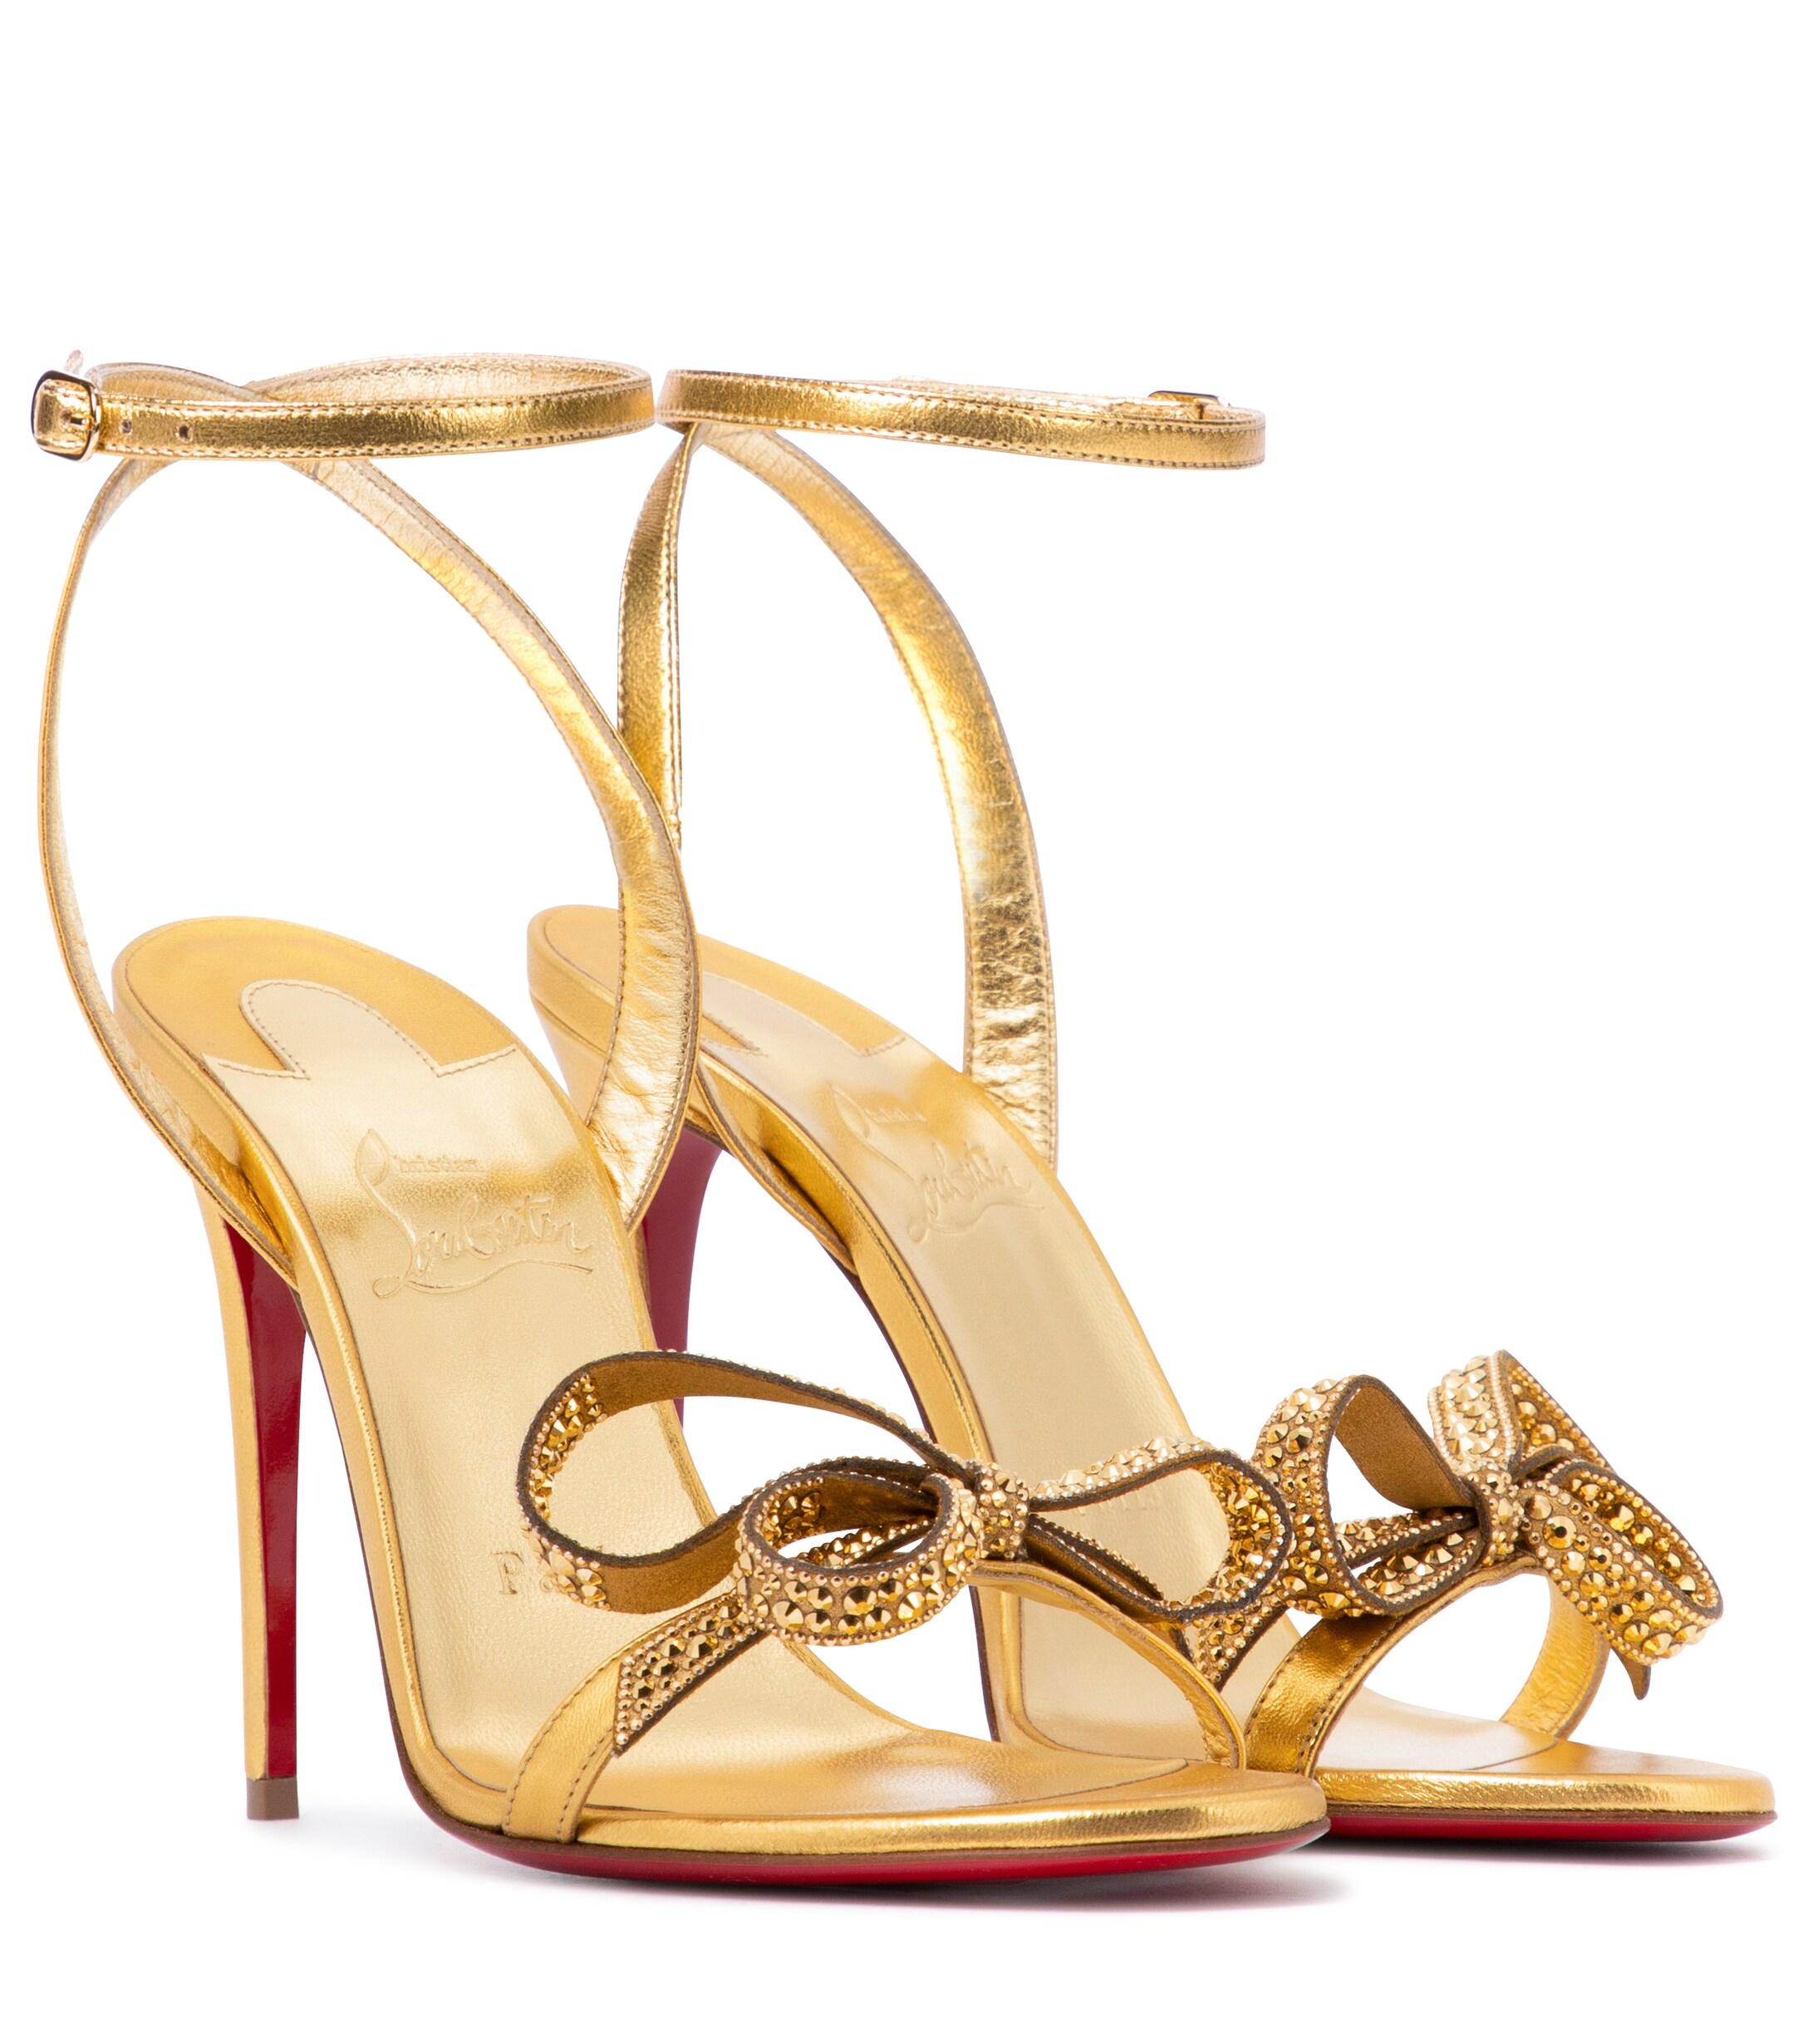 Christian Louboutin Exclusive To Mytheresa – Jewel Queen 100 Leather Sandals  in Gold (Metallic) - Lyst